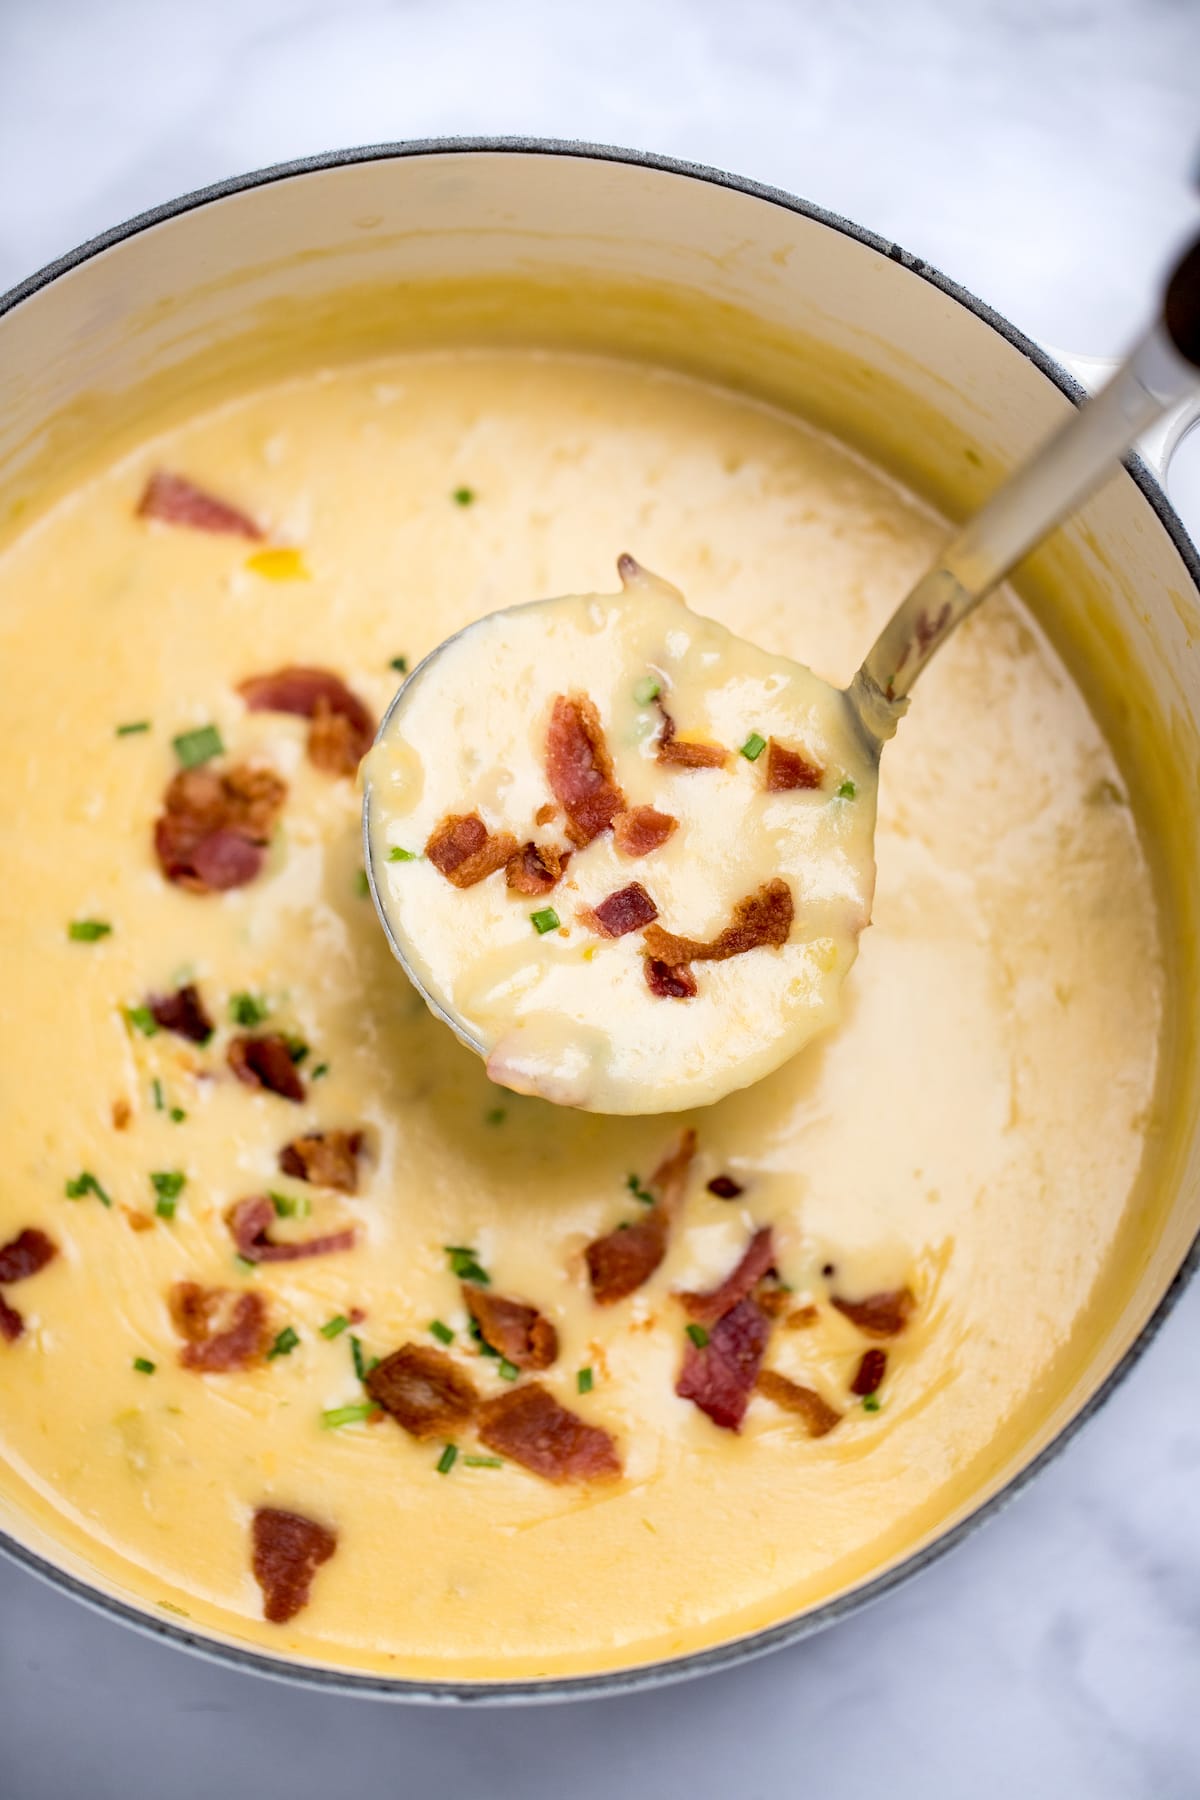 A dutch oven full of potato cheese soup topped with bacon and chives, with a ladle scooping up soup.